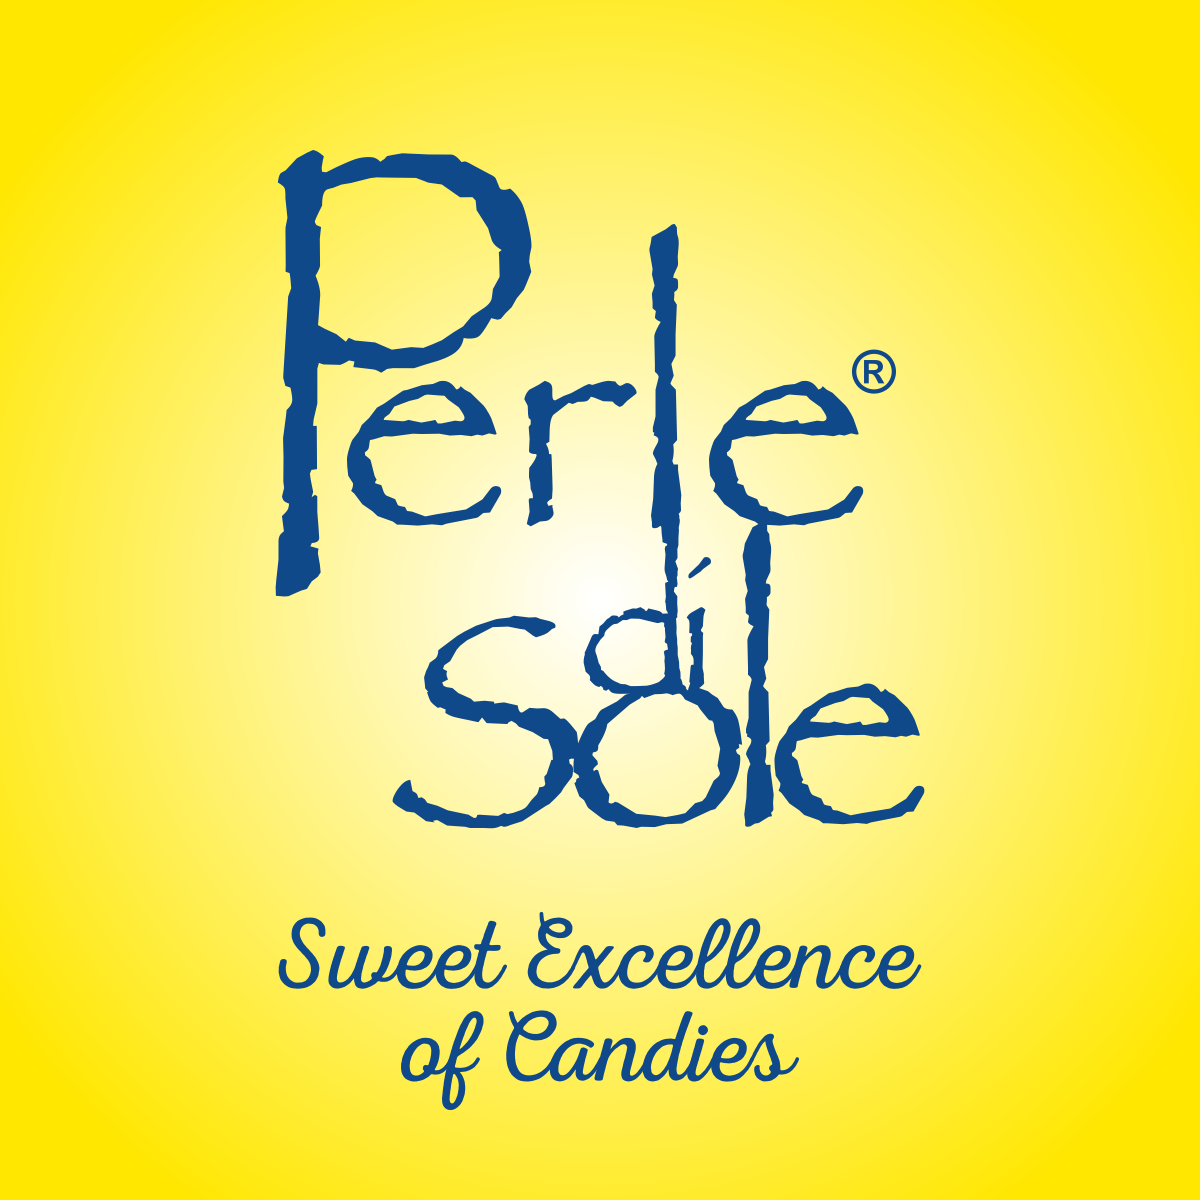 Perle di Sole LLC wholesale products